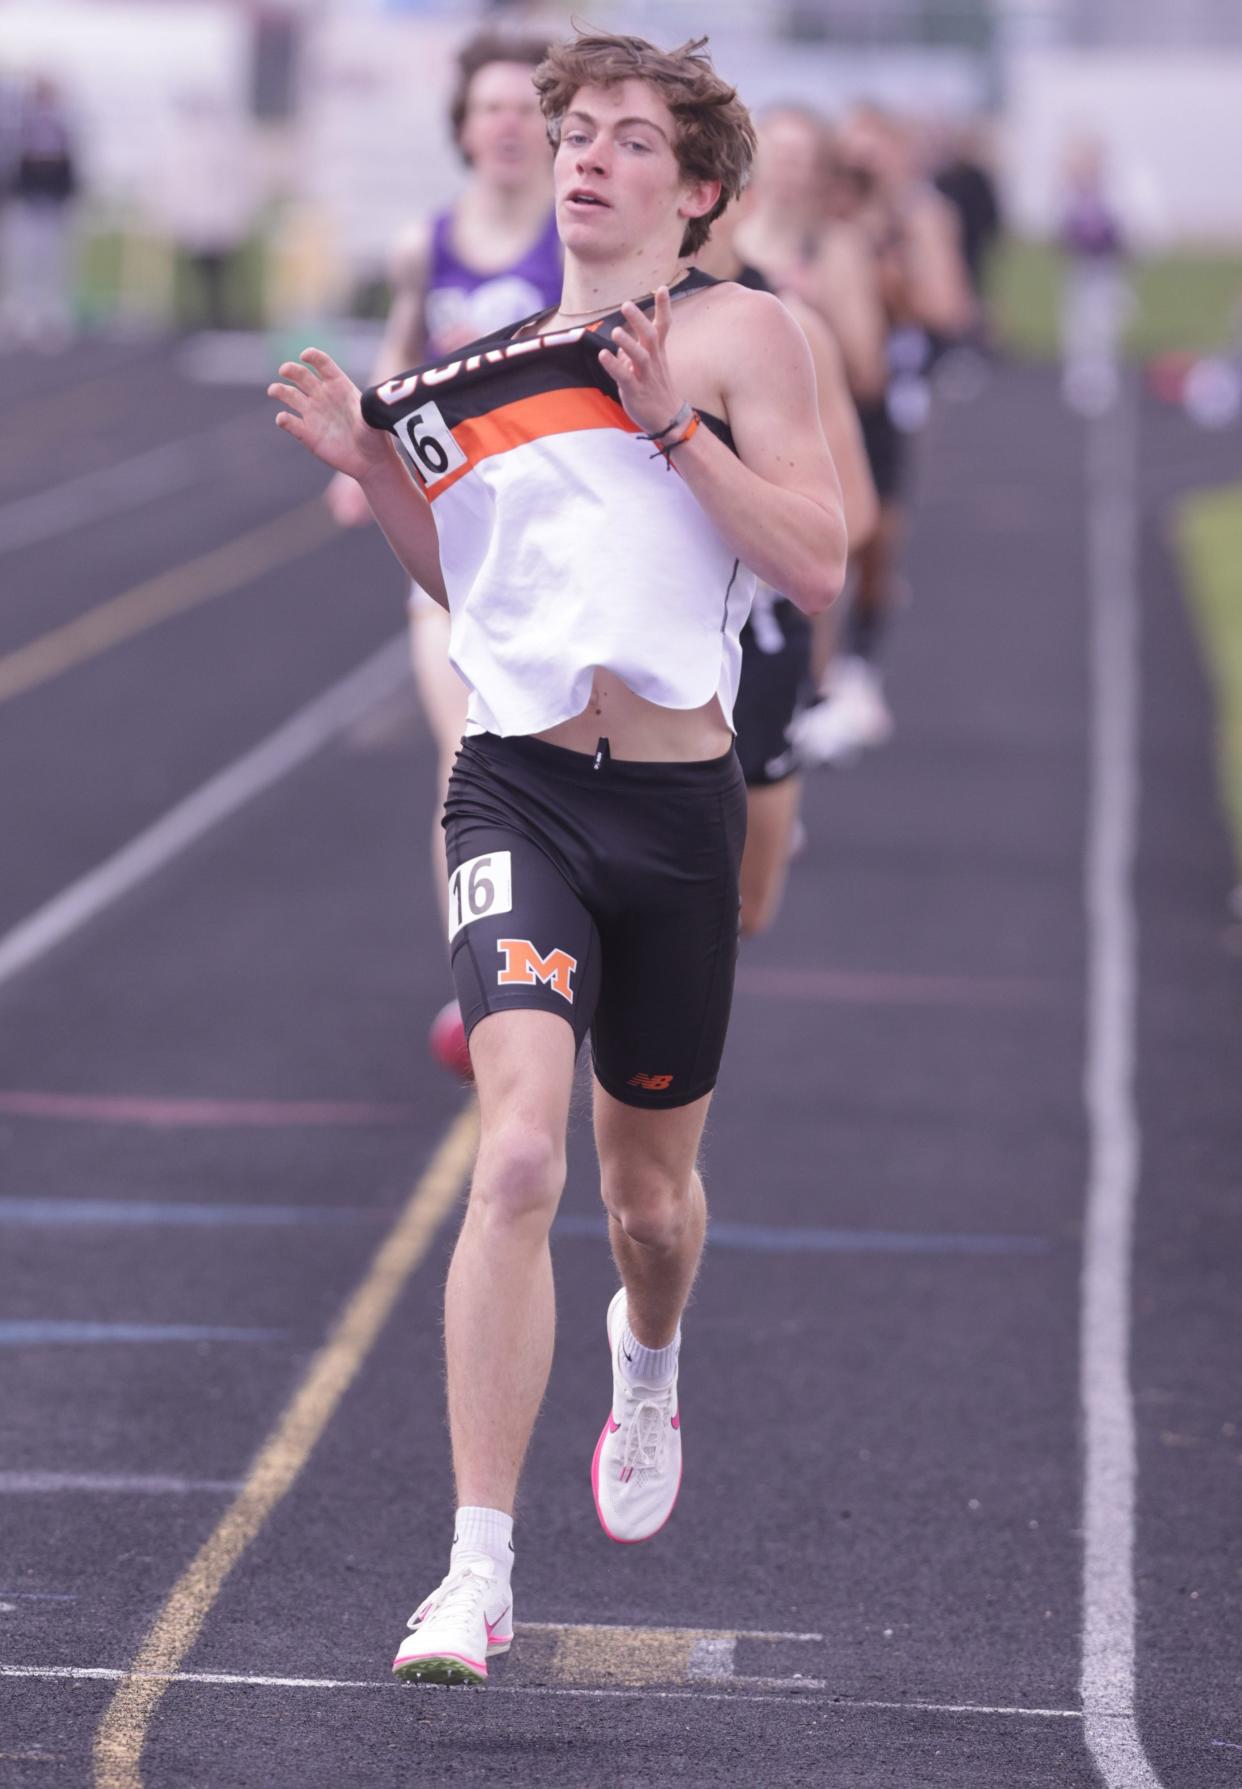 Marlington's Colin Cernansky wins the 1,600 meters at this year's Stark County Track and Field Championships.